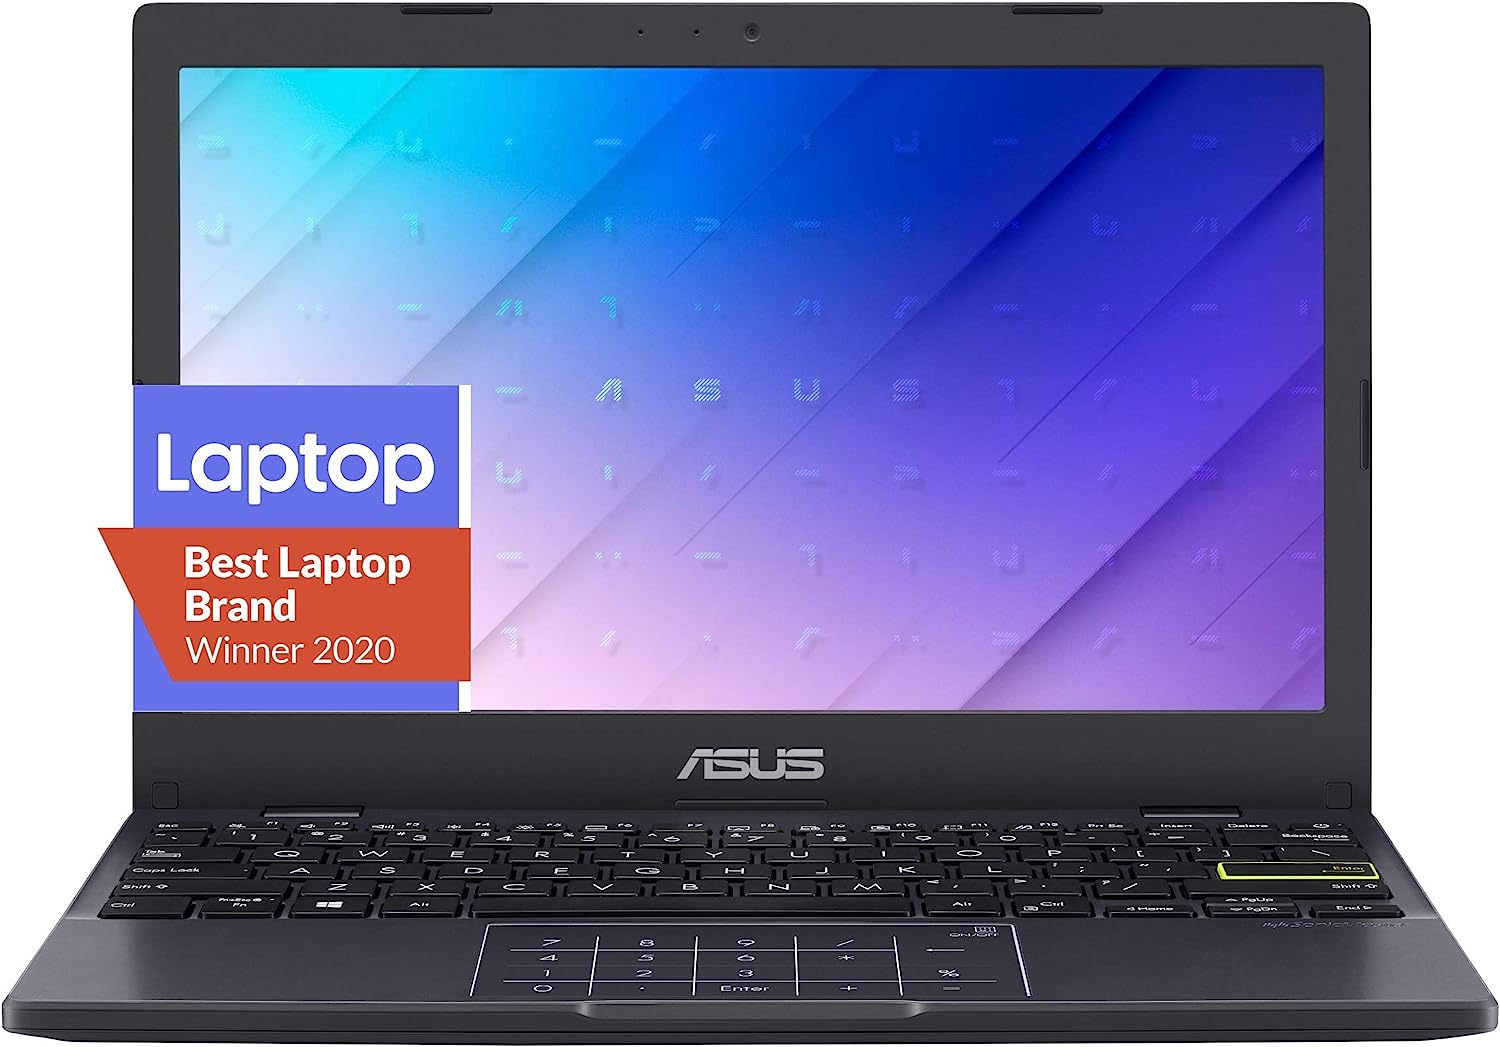 asus laptop for linux review